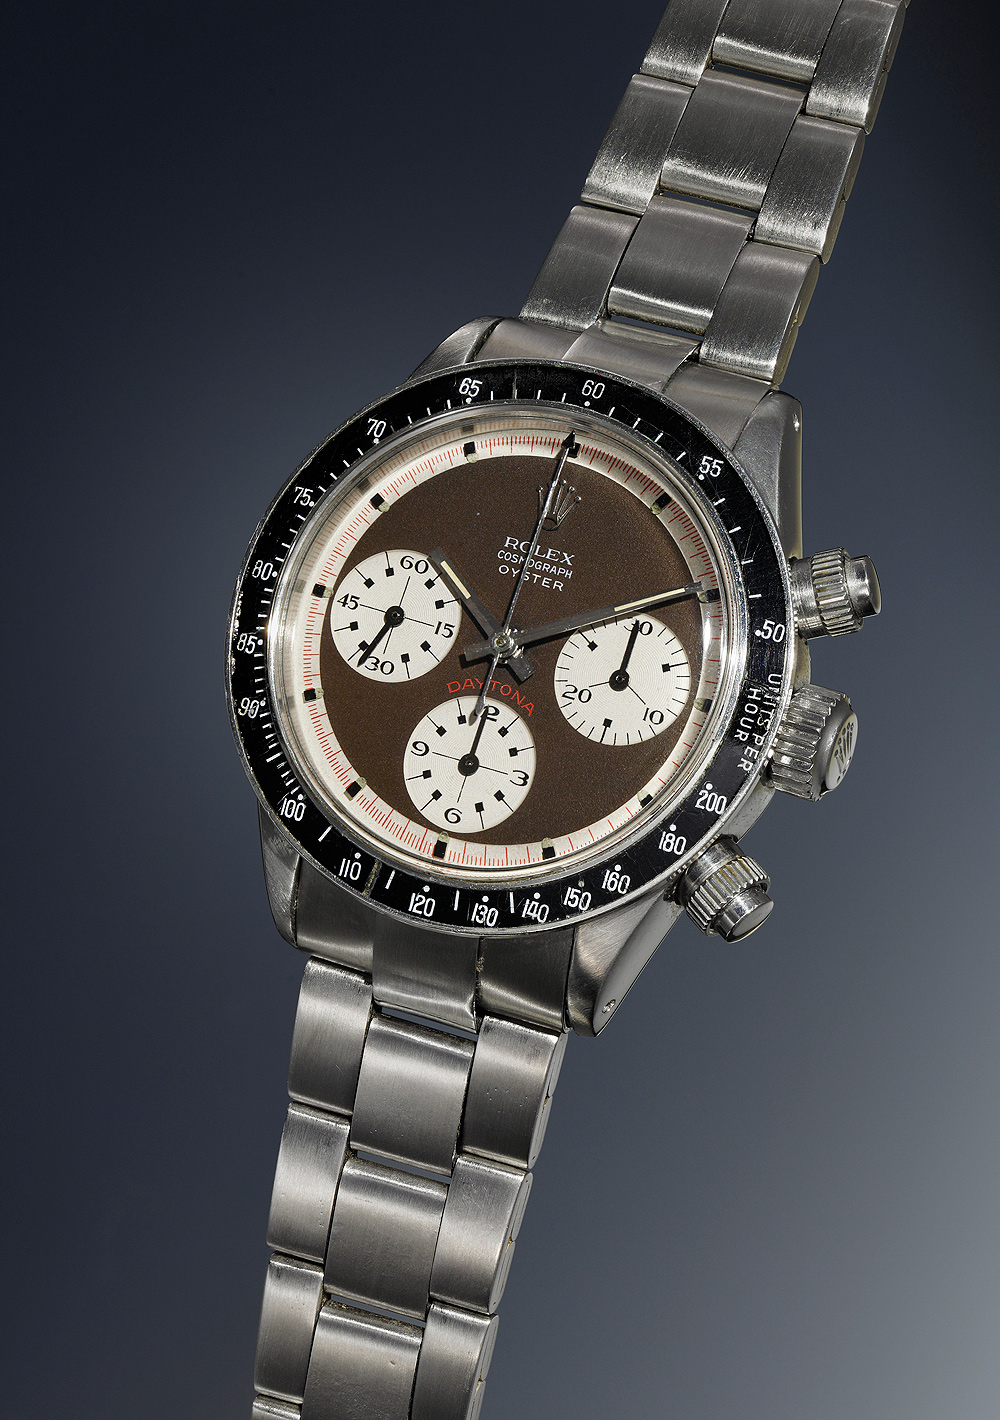 Rolex_Ref_6263_Oyster_Sotto_front_1000.jpg